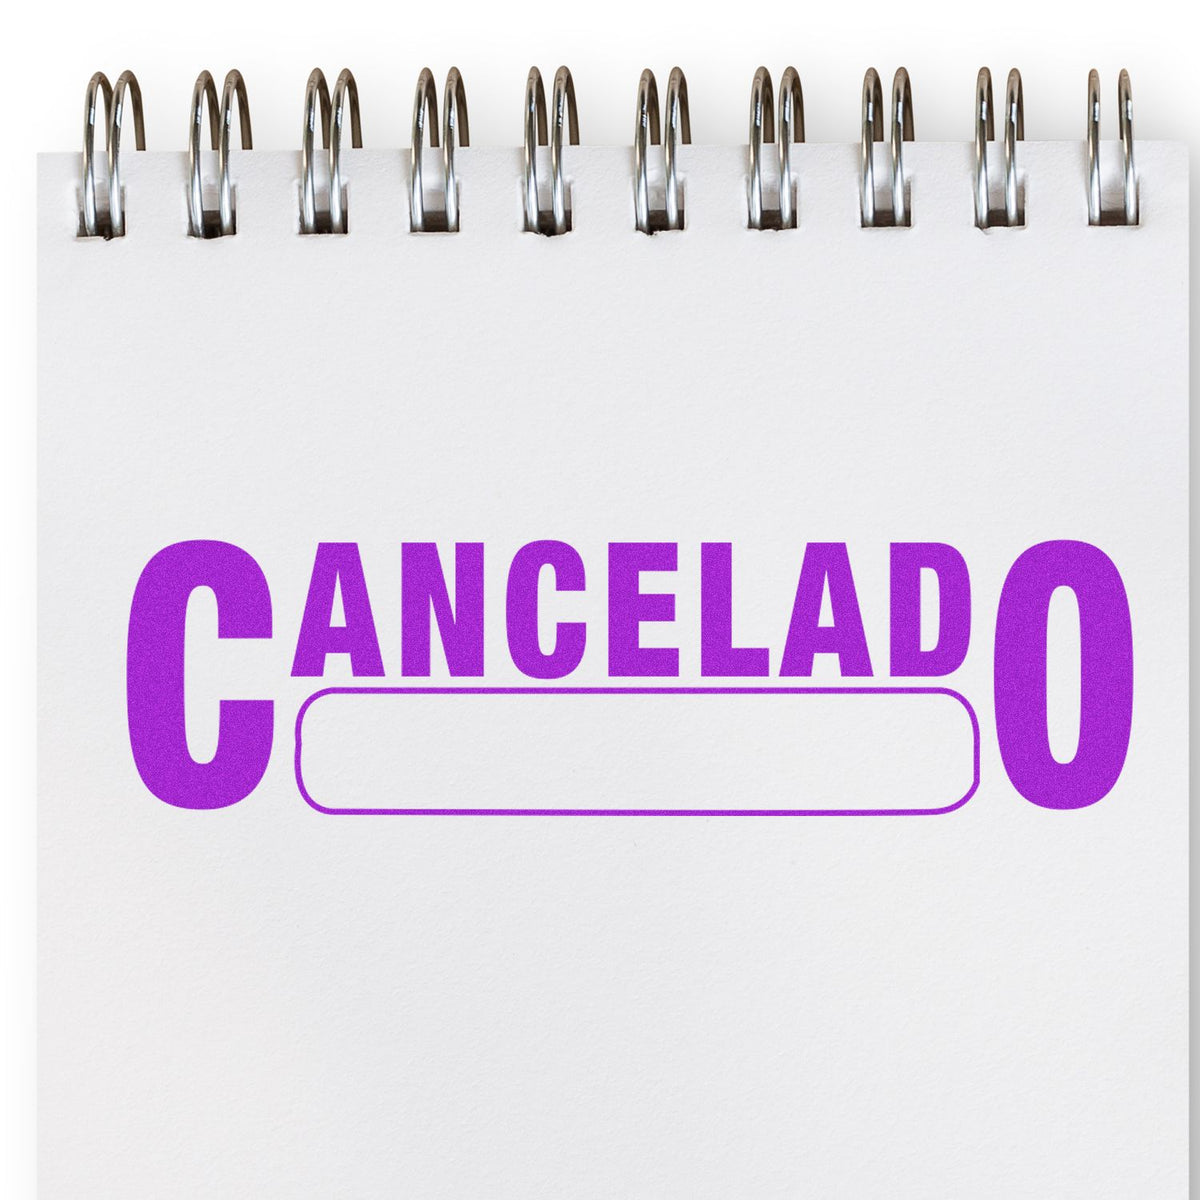 Cancelado with Box Rubber Stamp In Use